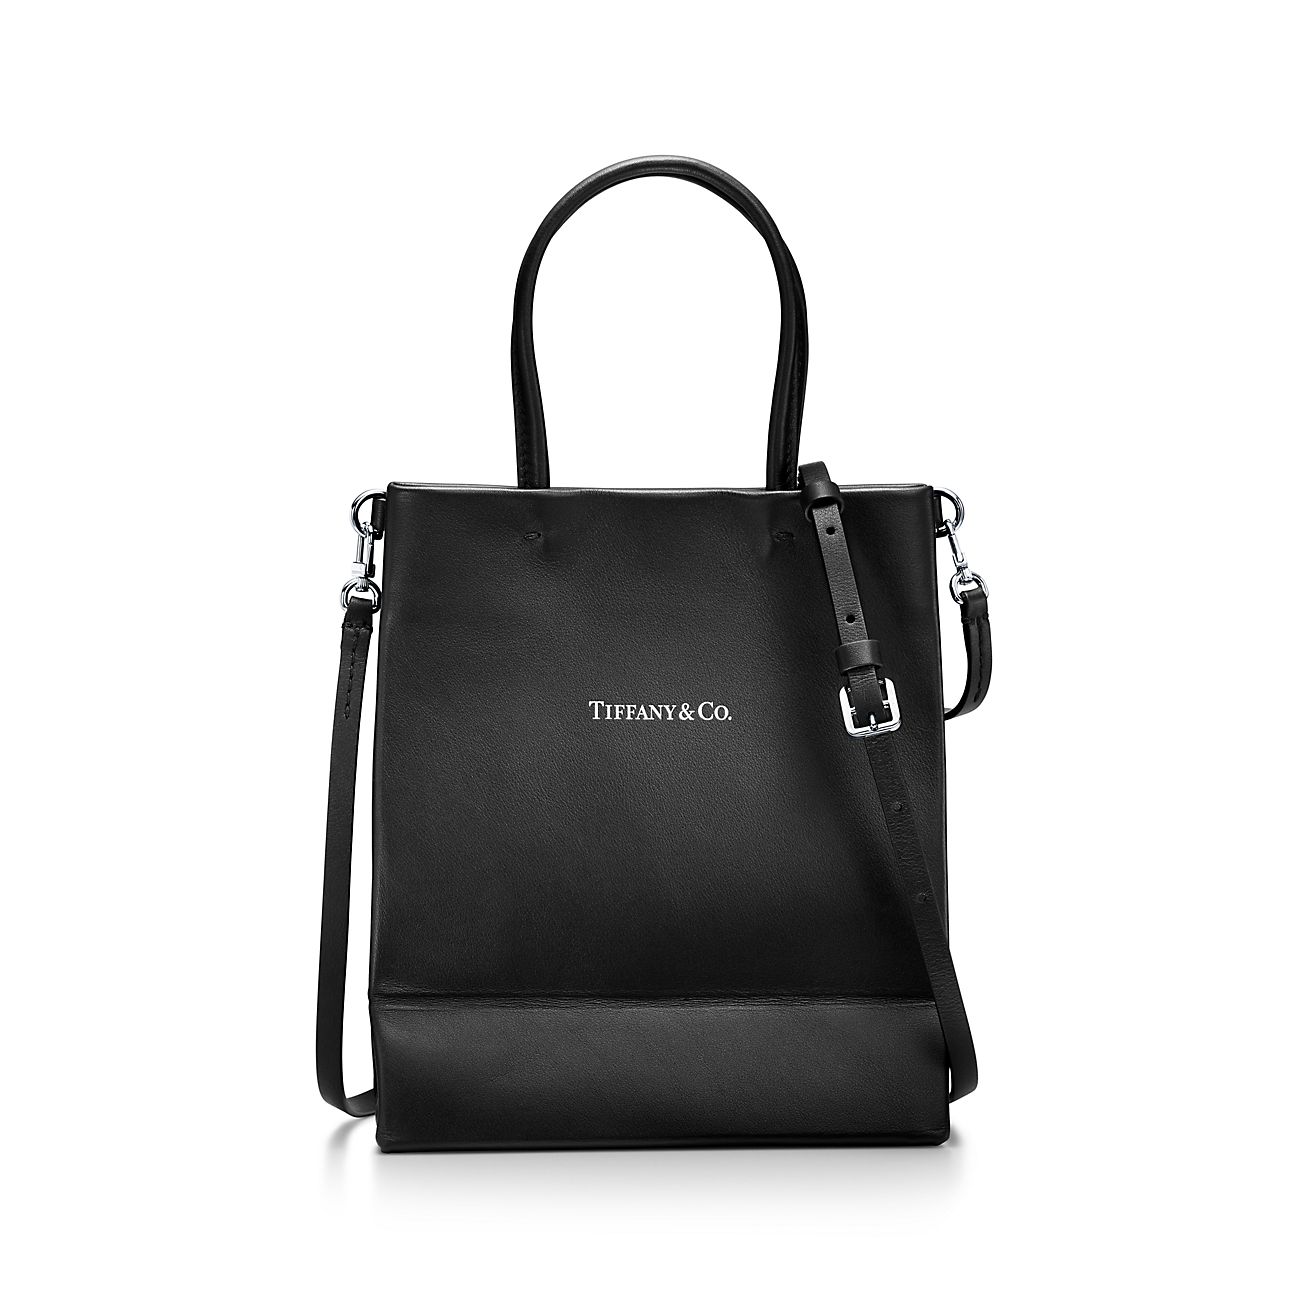 Nutrition hobby Oriental Tiffany & Co. Small Shopping Tote in Black Leather | Tiffany & Co.